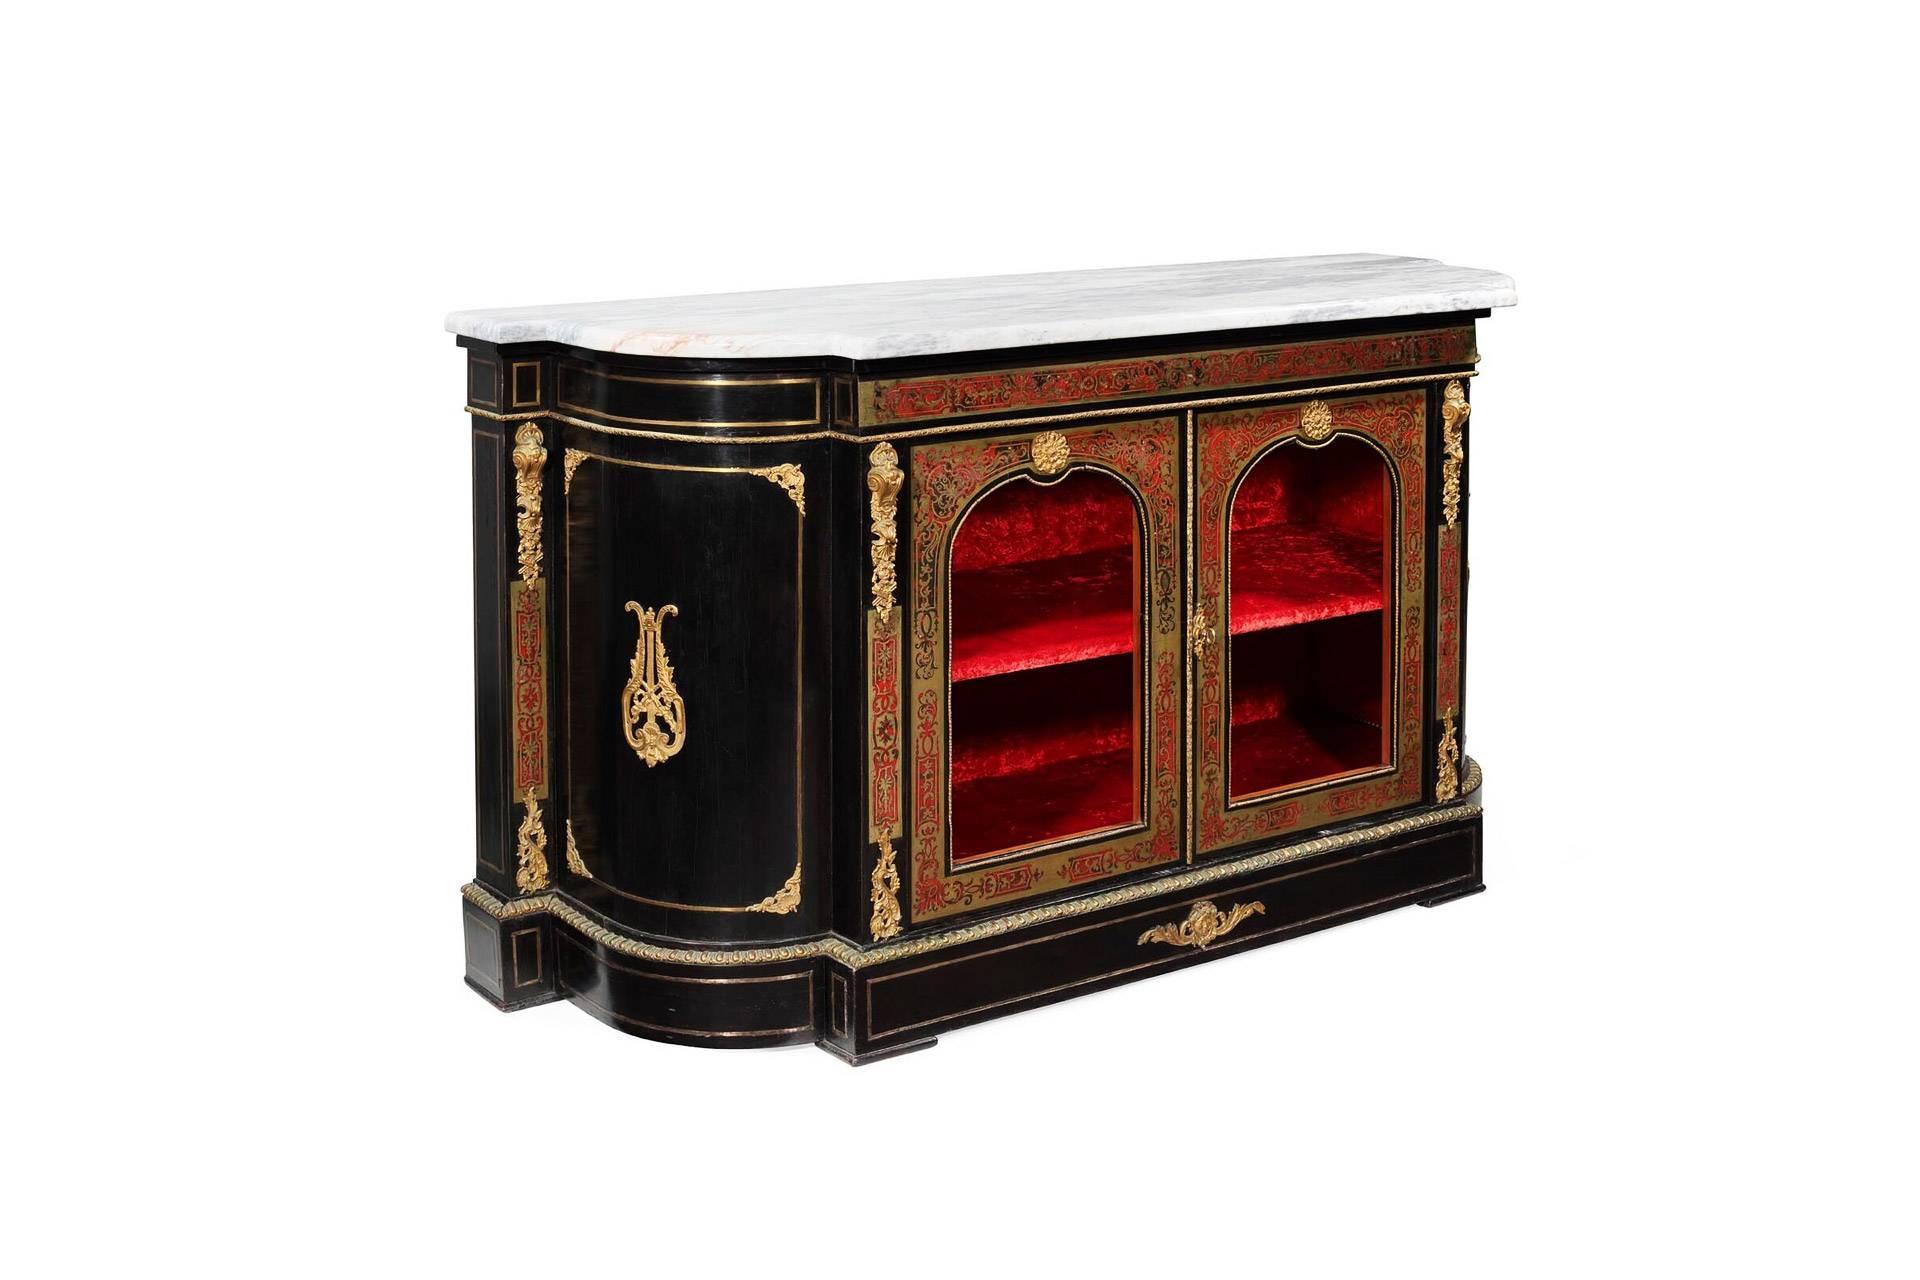 Boulle credenza with tortoiseshell and metal inlay. Beautiful white marble top, transparent glass doors and interior upholstered in red velvet. Decorative brass applications throughout.
 